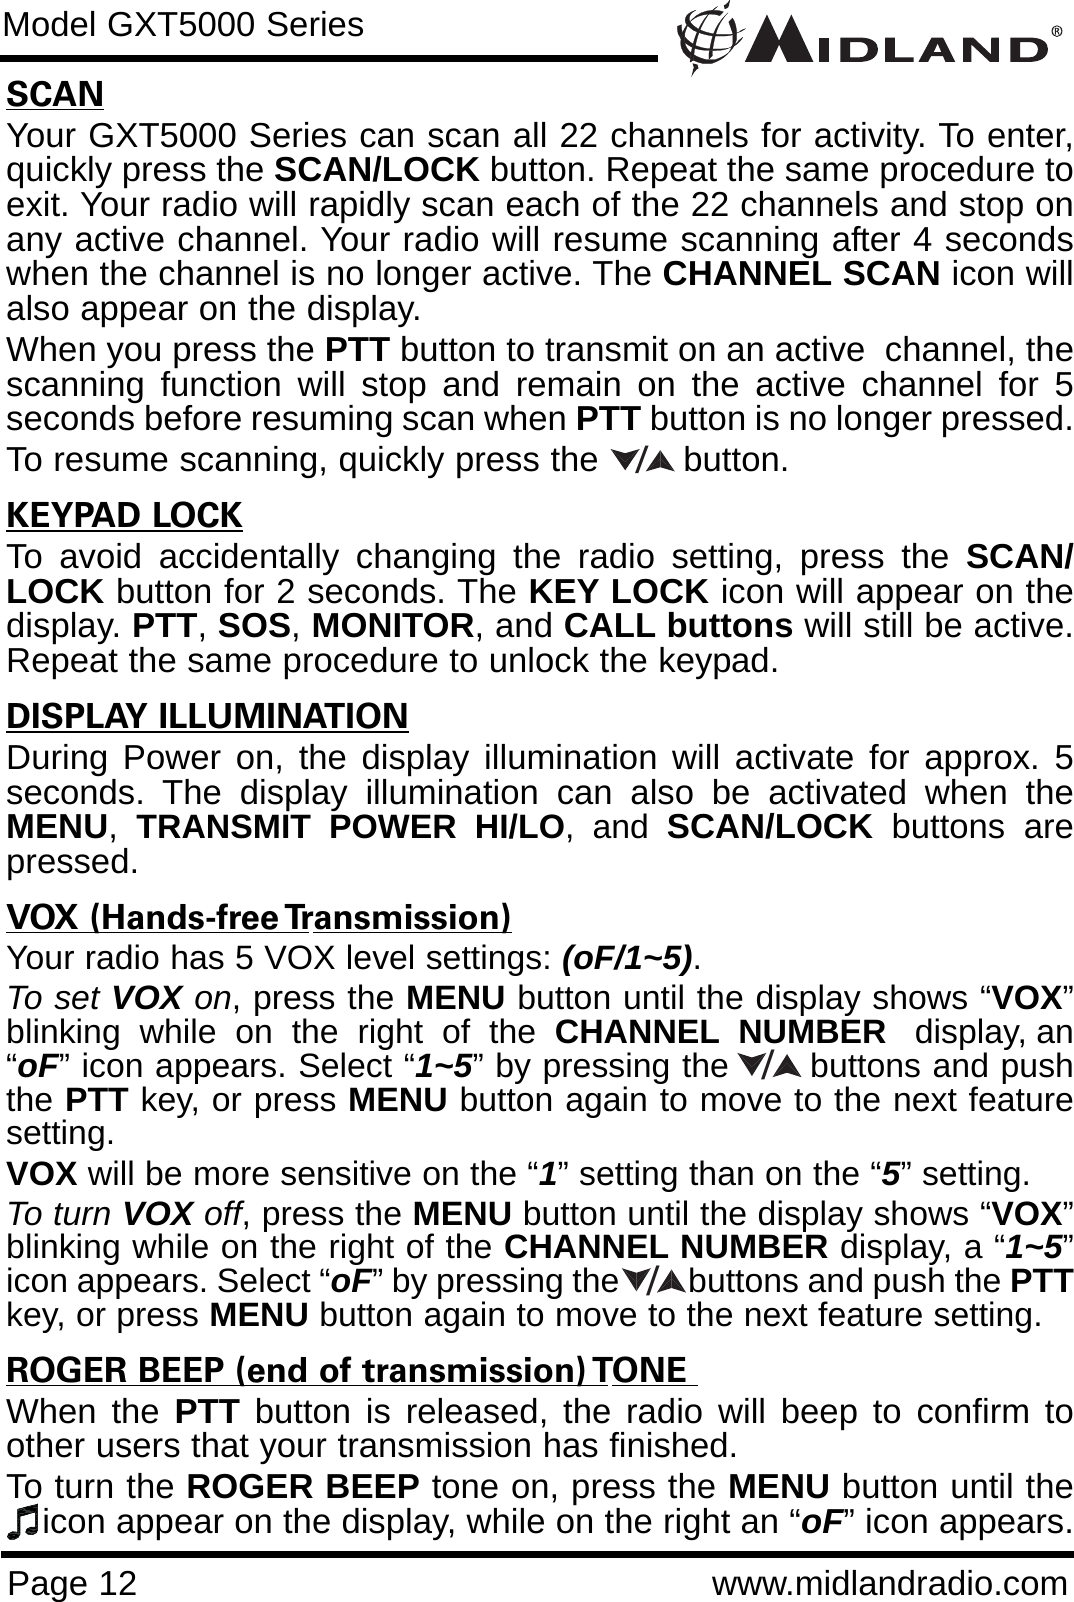 Page 12 www.midlandradio.comModel GXT5000 SeriesSCANYour GXT5000 Series can scan all 22 channels for activity. To enter,quickly press the SCAN/LOCK button. Repeat the same procedure toexit. Your radio will rapidly scan each of the 22 channels and stop onany active channel. Your radio will resume scanning after 4 secondswhen the channel is no longer active. The CHANNEL SCAN icon willalso appear on the display.When you press the PTT button to transmit on an active  channel, thescanning function will stop and remain on the active channel for 5seconds before resuming scan when PTT button is no longer pressed. To resume scanning, quickly press the  button.KEYPAD LOCKTo avoid accidentally changing the radio setting, press the SCAN/LOCK button for 2 seconds. The KEY LOCK icon will appear on thedisplay. PTT, SOS, MONITOR, and CALL buttons will still be active.Repeat the same procedure to unlock the keypad.                              DISPLAY ILLUMINATIONDuring Power on, the display illumination will activate for approx. 5seconds. The display illumination can also be activated when theMENU,TRANSMIT POWER HI/LO, and SCAN/LOCK buttons arepressed.VOX (Hands-free Transmission)Your radio has 5 VOX level settings: (oF/1~5).To set VOX on, press the MENU button until the display shows “VOX”blinking  while  on  the  right  of  the  CHANNEL NUMBER display, an“oF” icon appears. Select “1~5” by pressing the       buttons and pushthe PTT key, or press MENU button again to move to the next featuresetting.  VOX will be more sensitive on the “1” setting than on the “5” setting.To turn VOX off, press the MENU button until the display shows “VOX”blinking while on the right of the CHANNEL NUMBER display, a “1~5”icon appears. Select “oF” by pressing the        buttons and push the PTTkey, or press MENU button again to move to the next feature setting.ROGER BEEP (end of transmission) TONE When the PTT button is released, the radio will beep to confirm toother users that your transmission has finished. To turn the ROGER BEEP tone on, press the MENU button until theicon appear on the display, while on the right an “oF” icon appears. ///